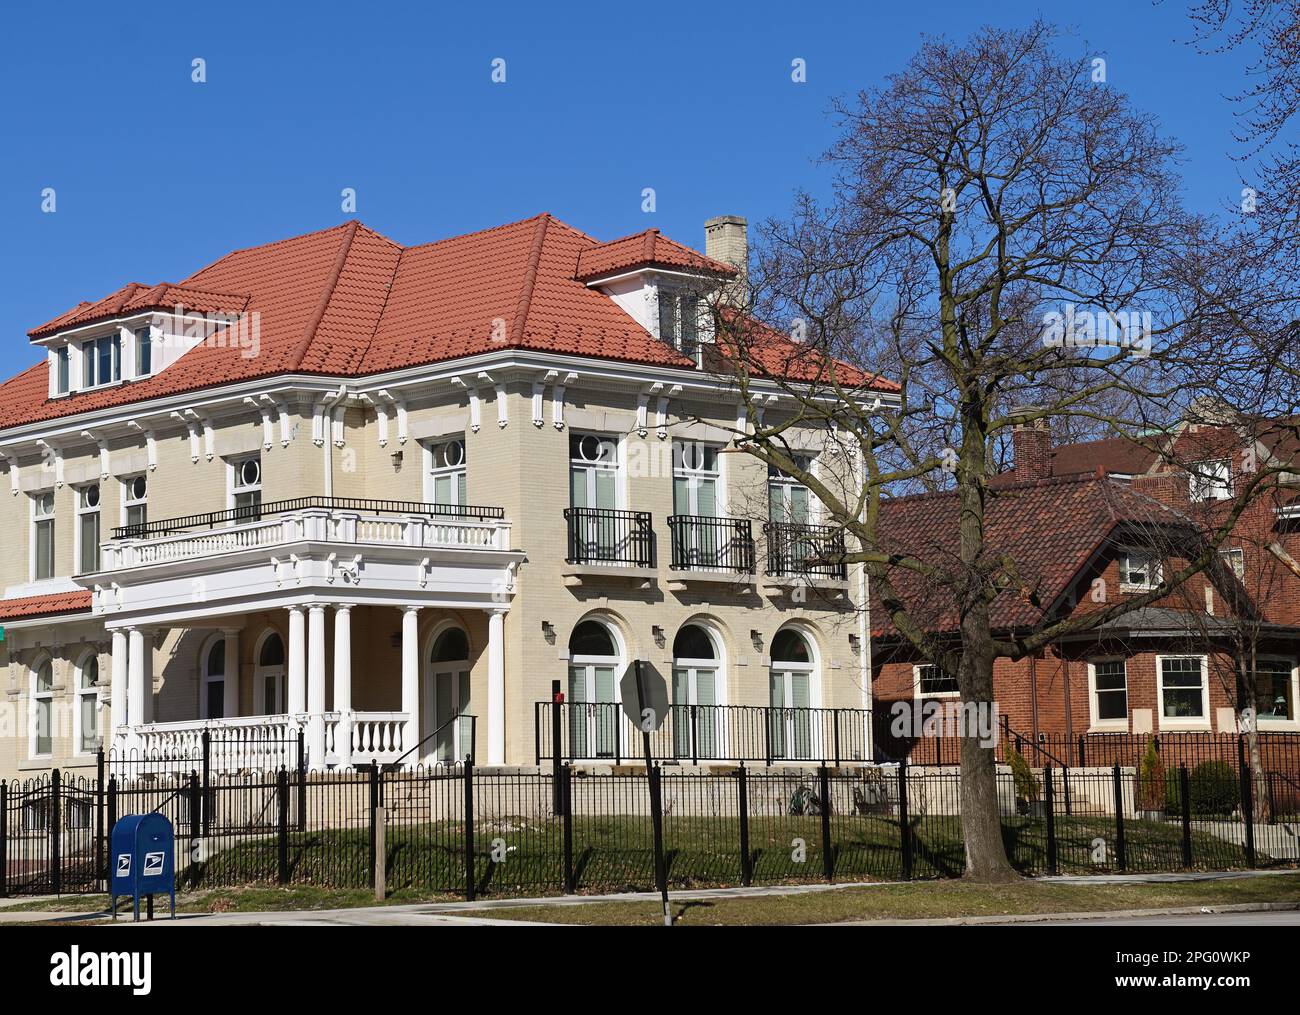 Chicago, Illinois, USA. Opulent homes located in the Kenwood neighborhood on Chicago's South Side. Stock Photo